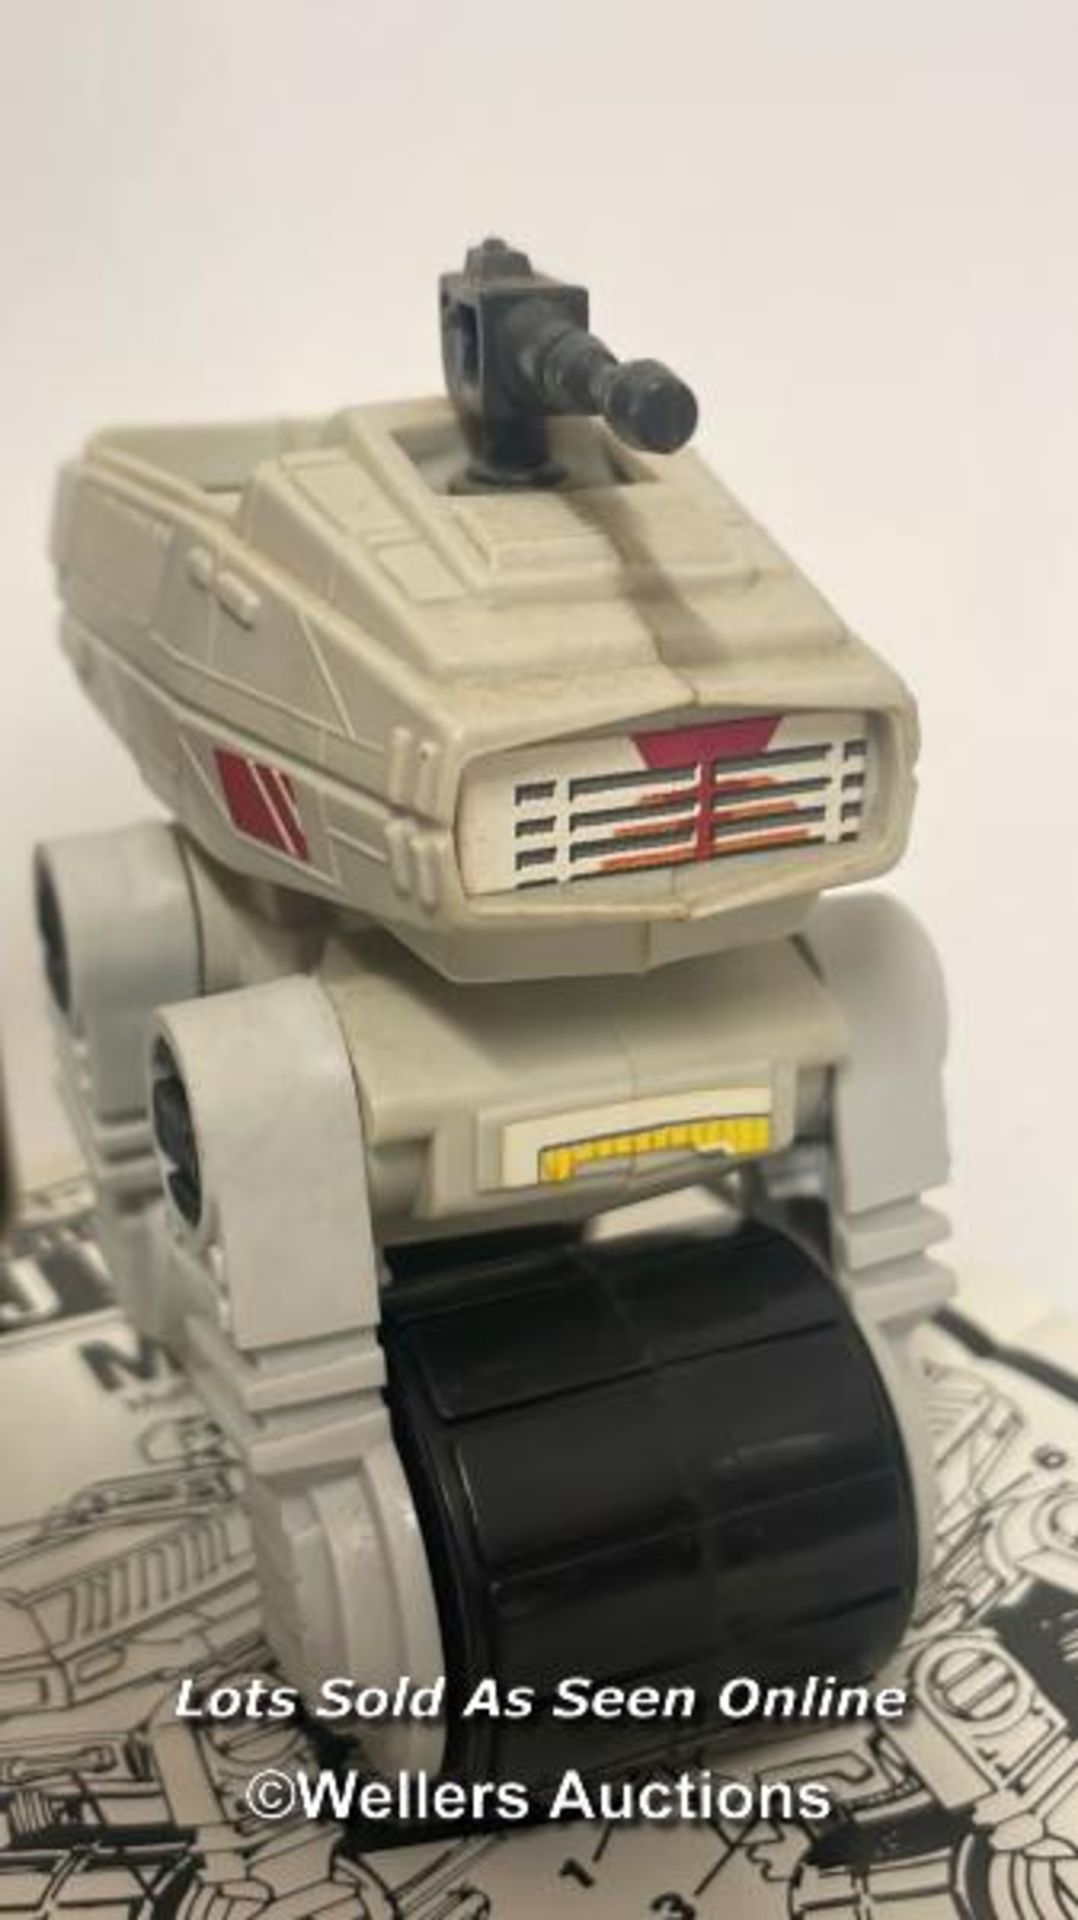 Vintage Star Wars the Battle of Hoth lot, including Palitoy Wampa creature, Kenner Radar Laser - Image 11 of 14